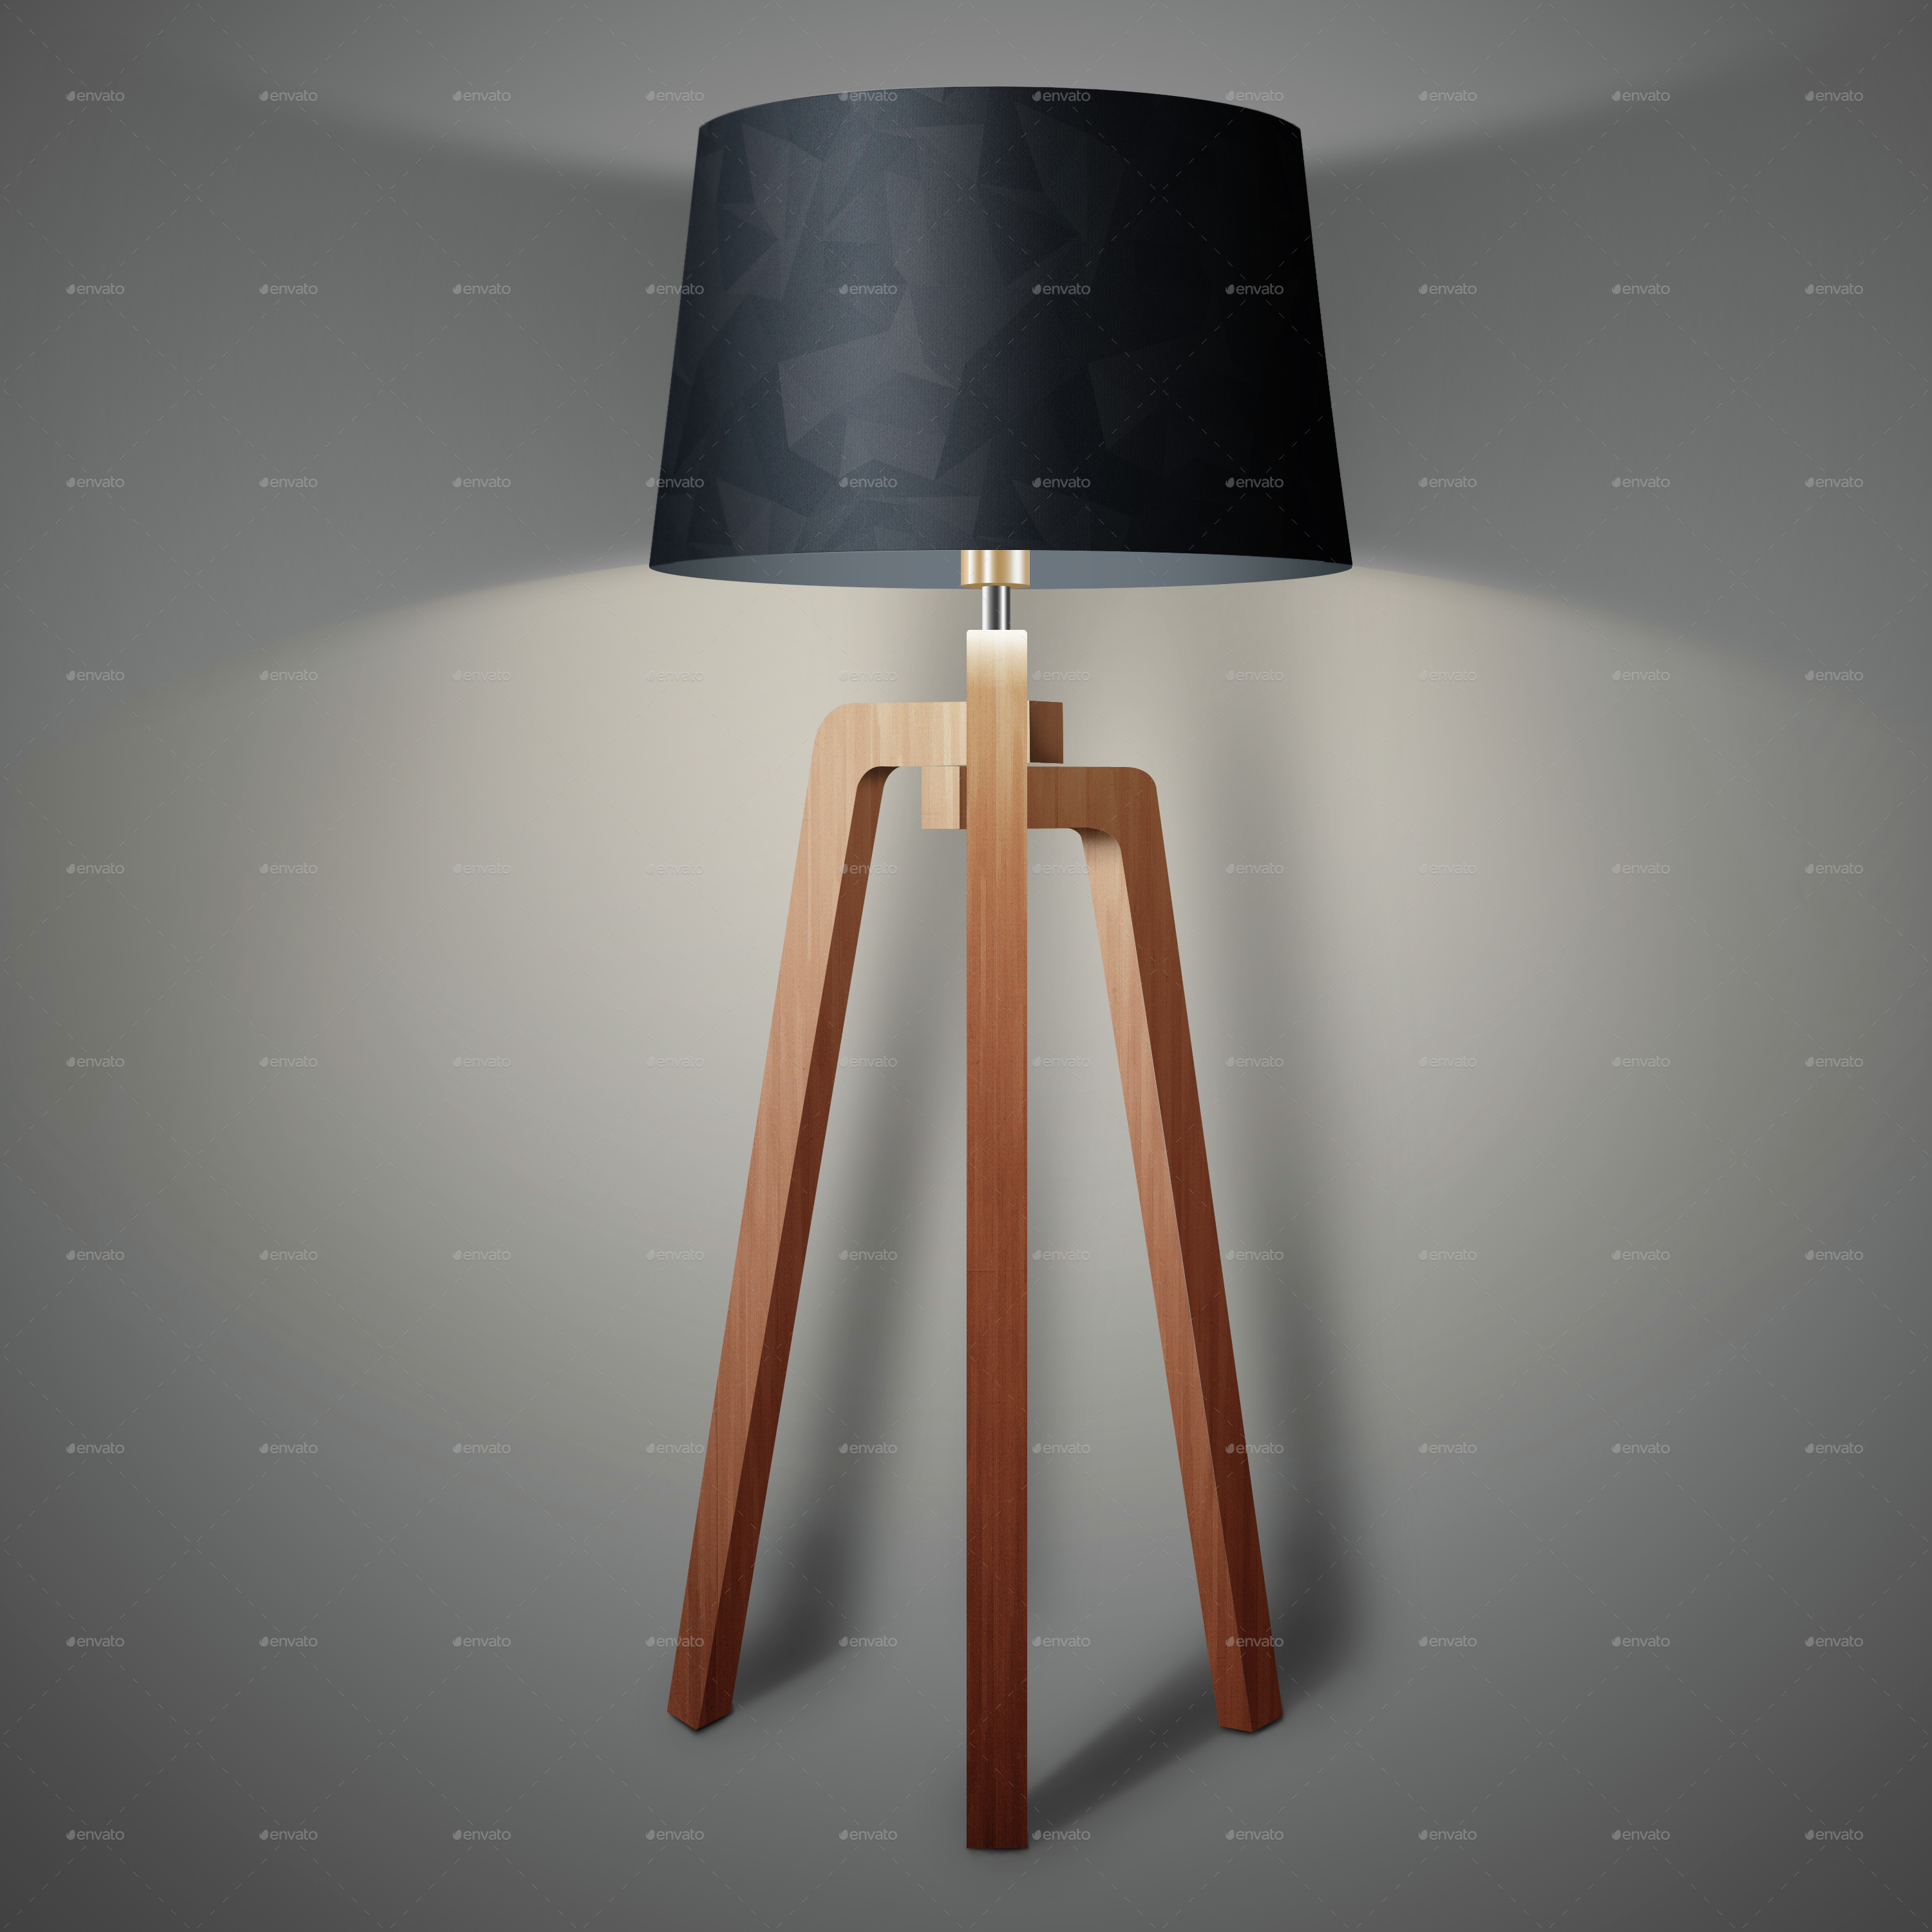 Download Lampshade Mock-up Pack by harmanov | GraphicRiver